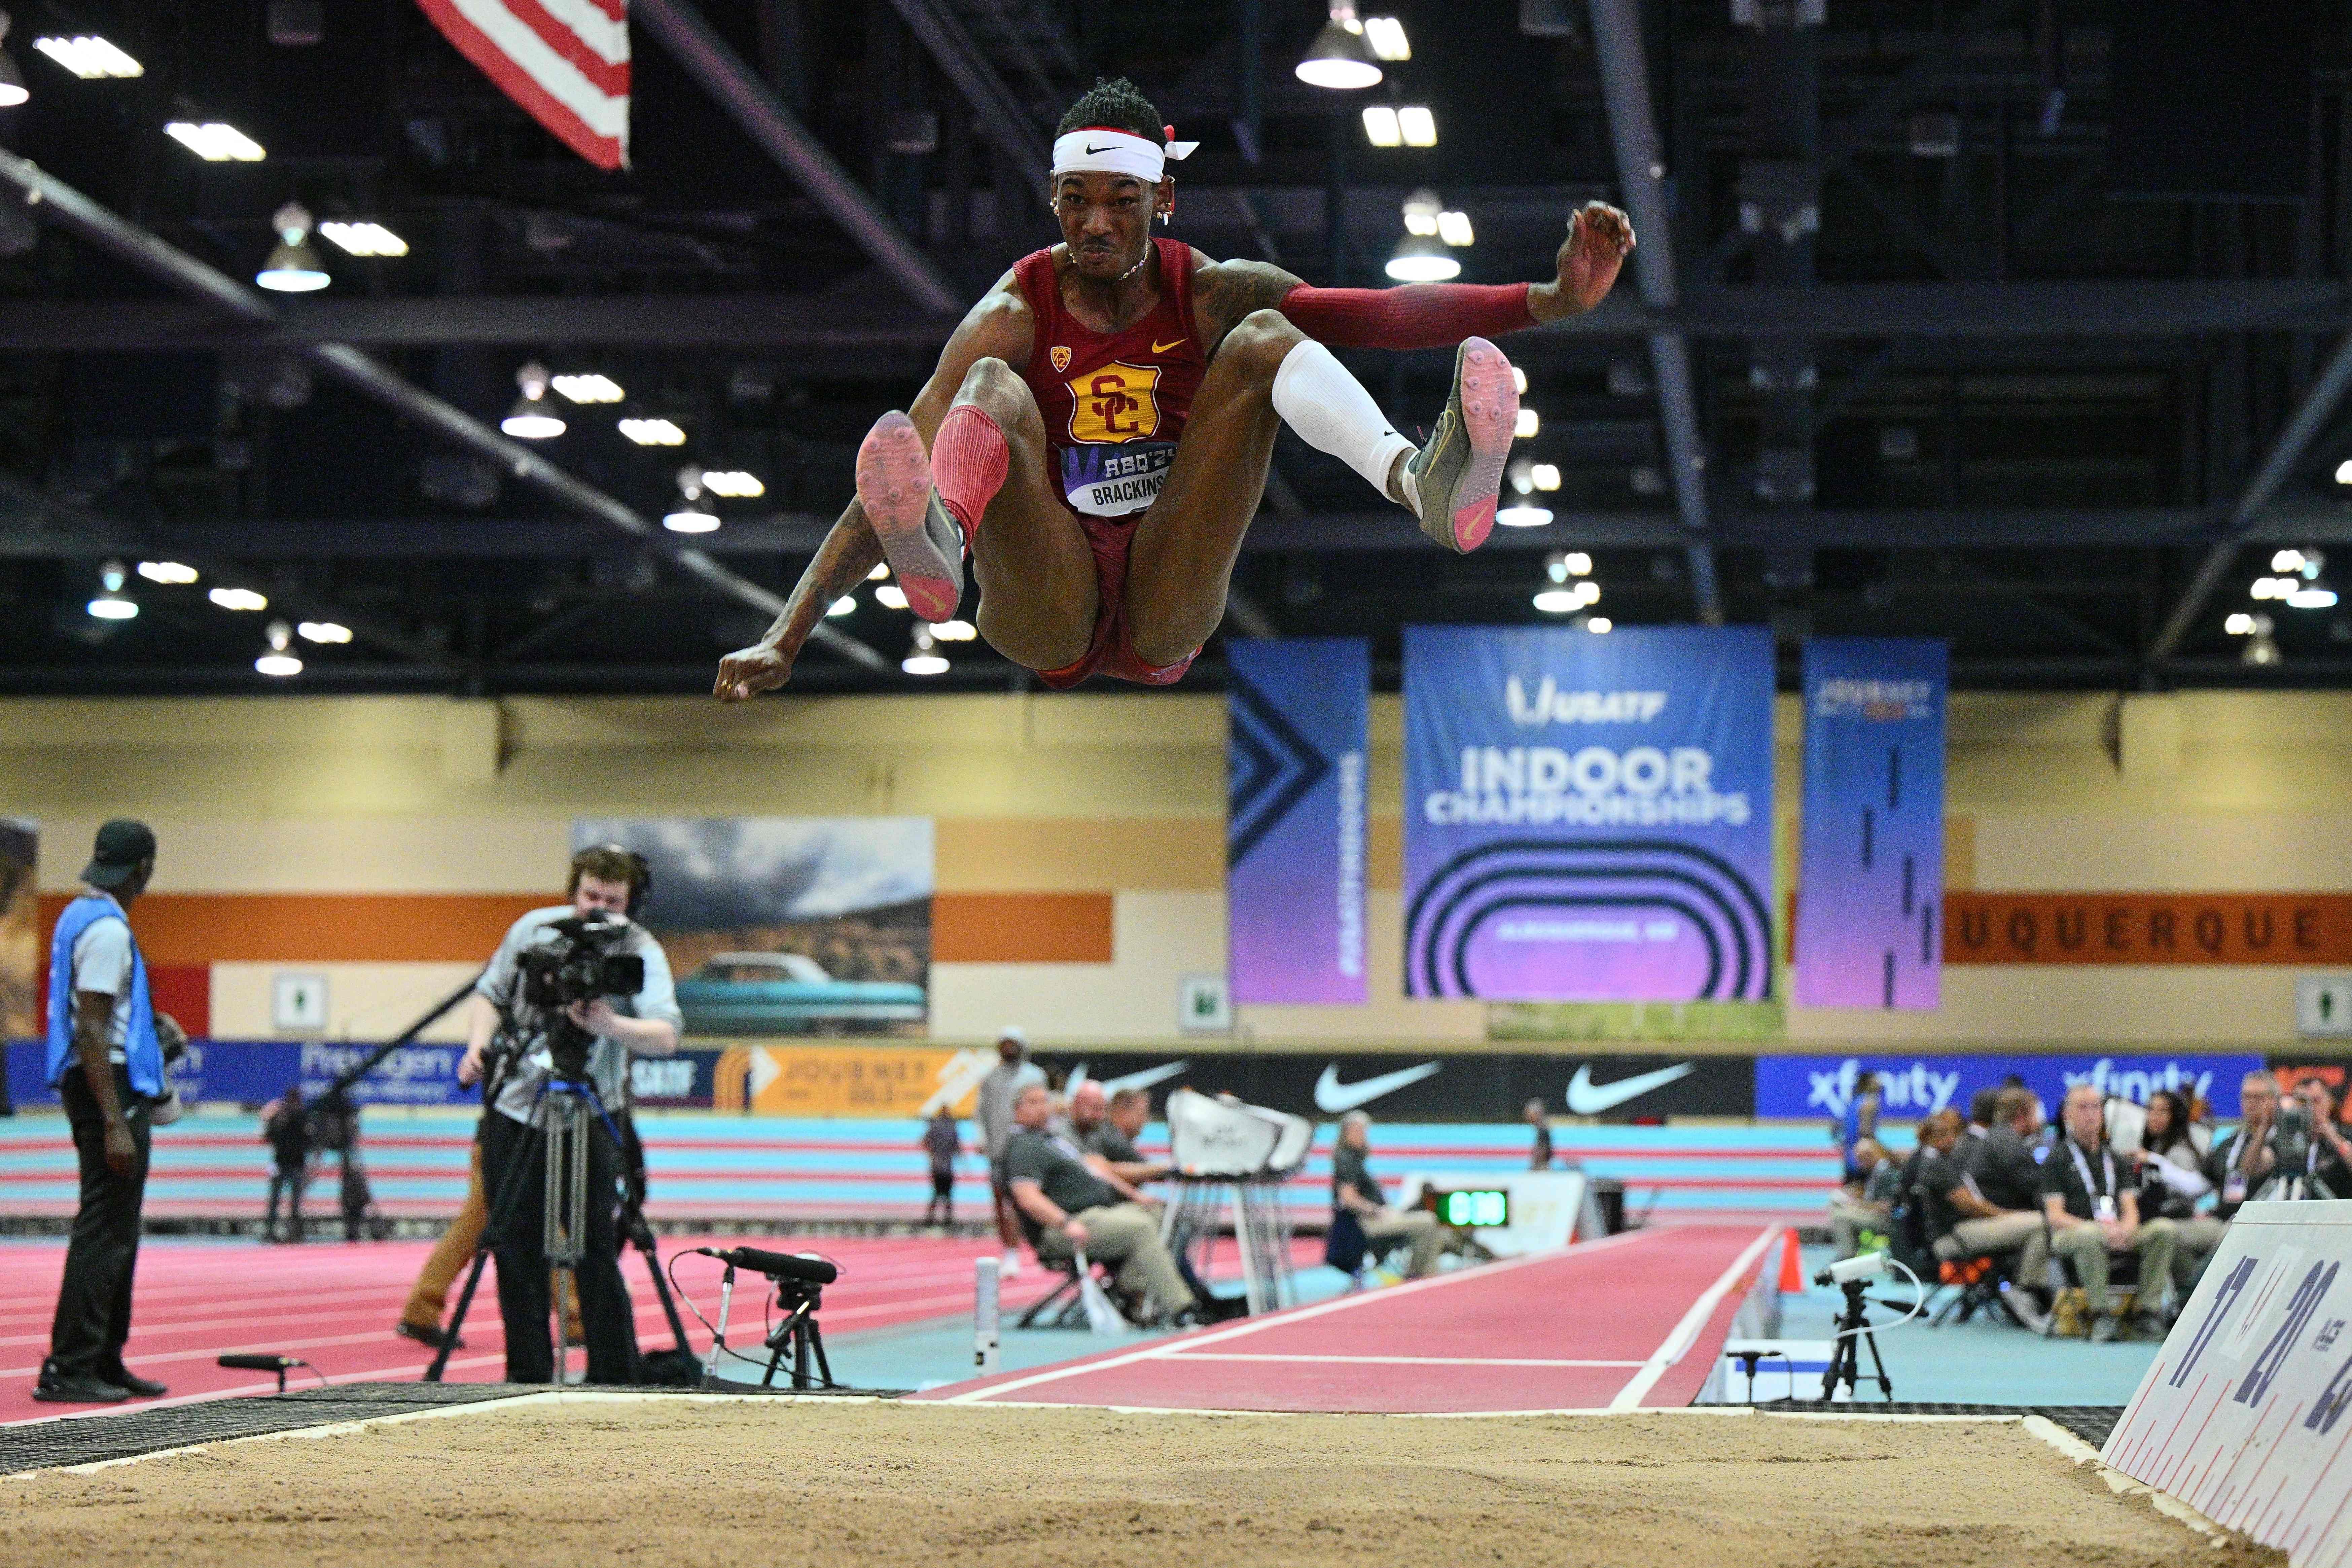 Long jumpers take aim at potential take-off rule changes